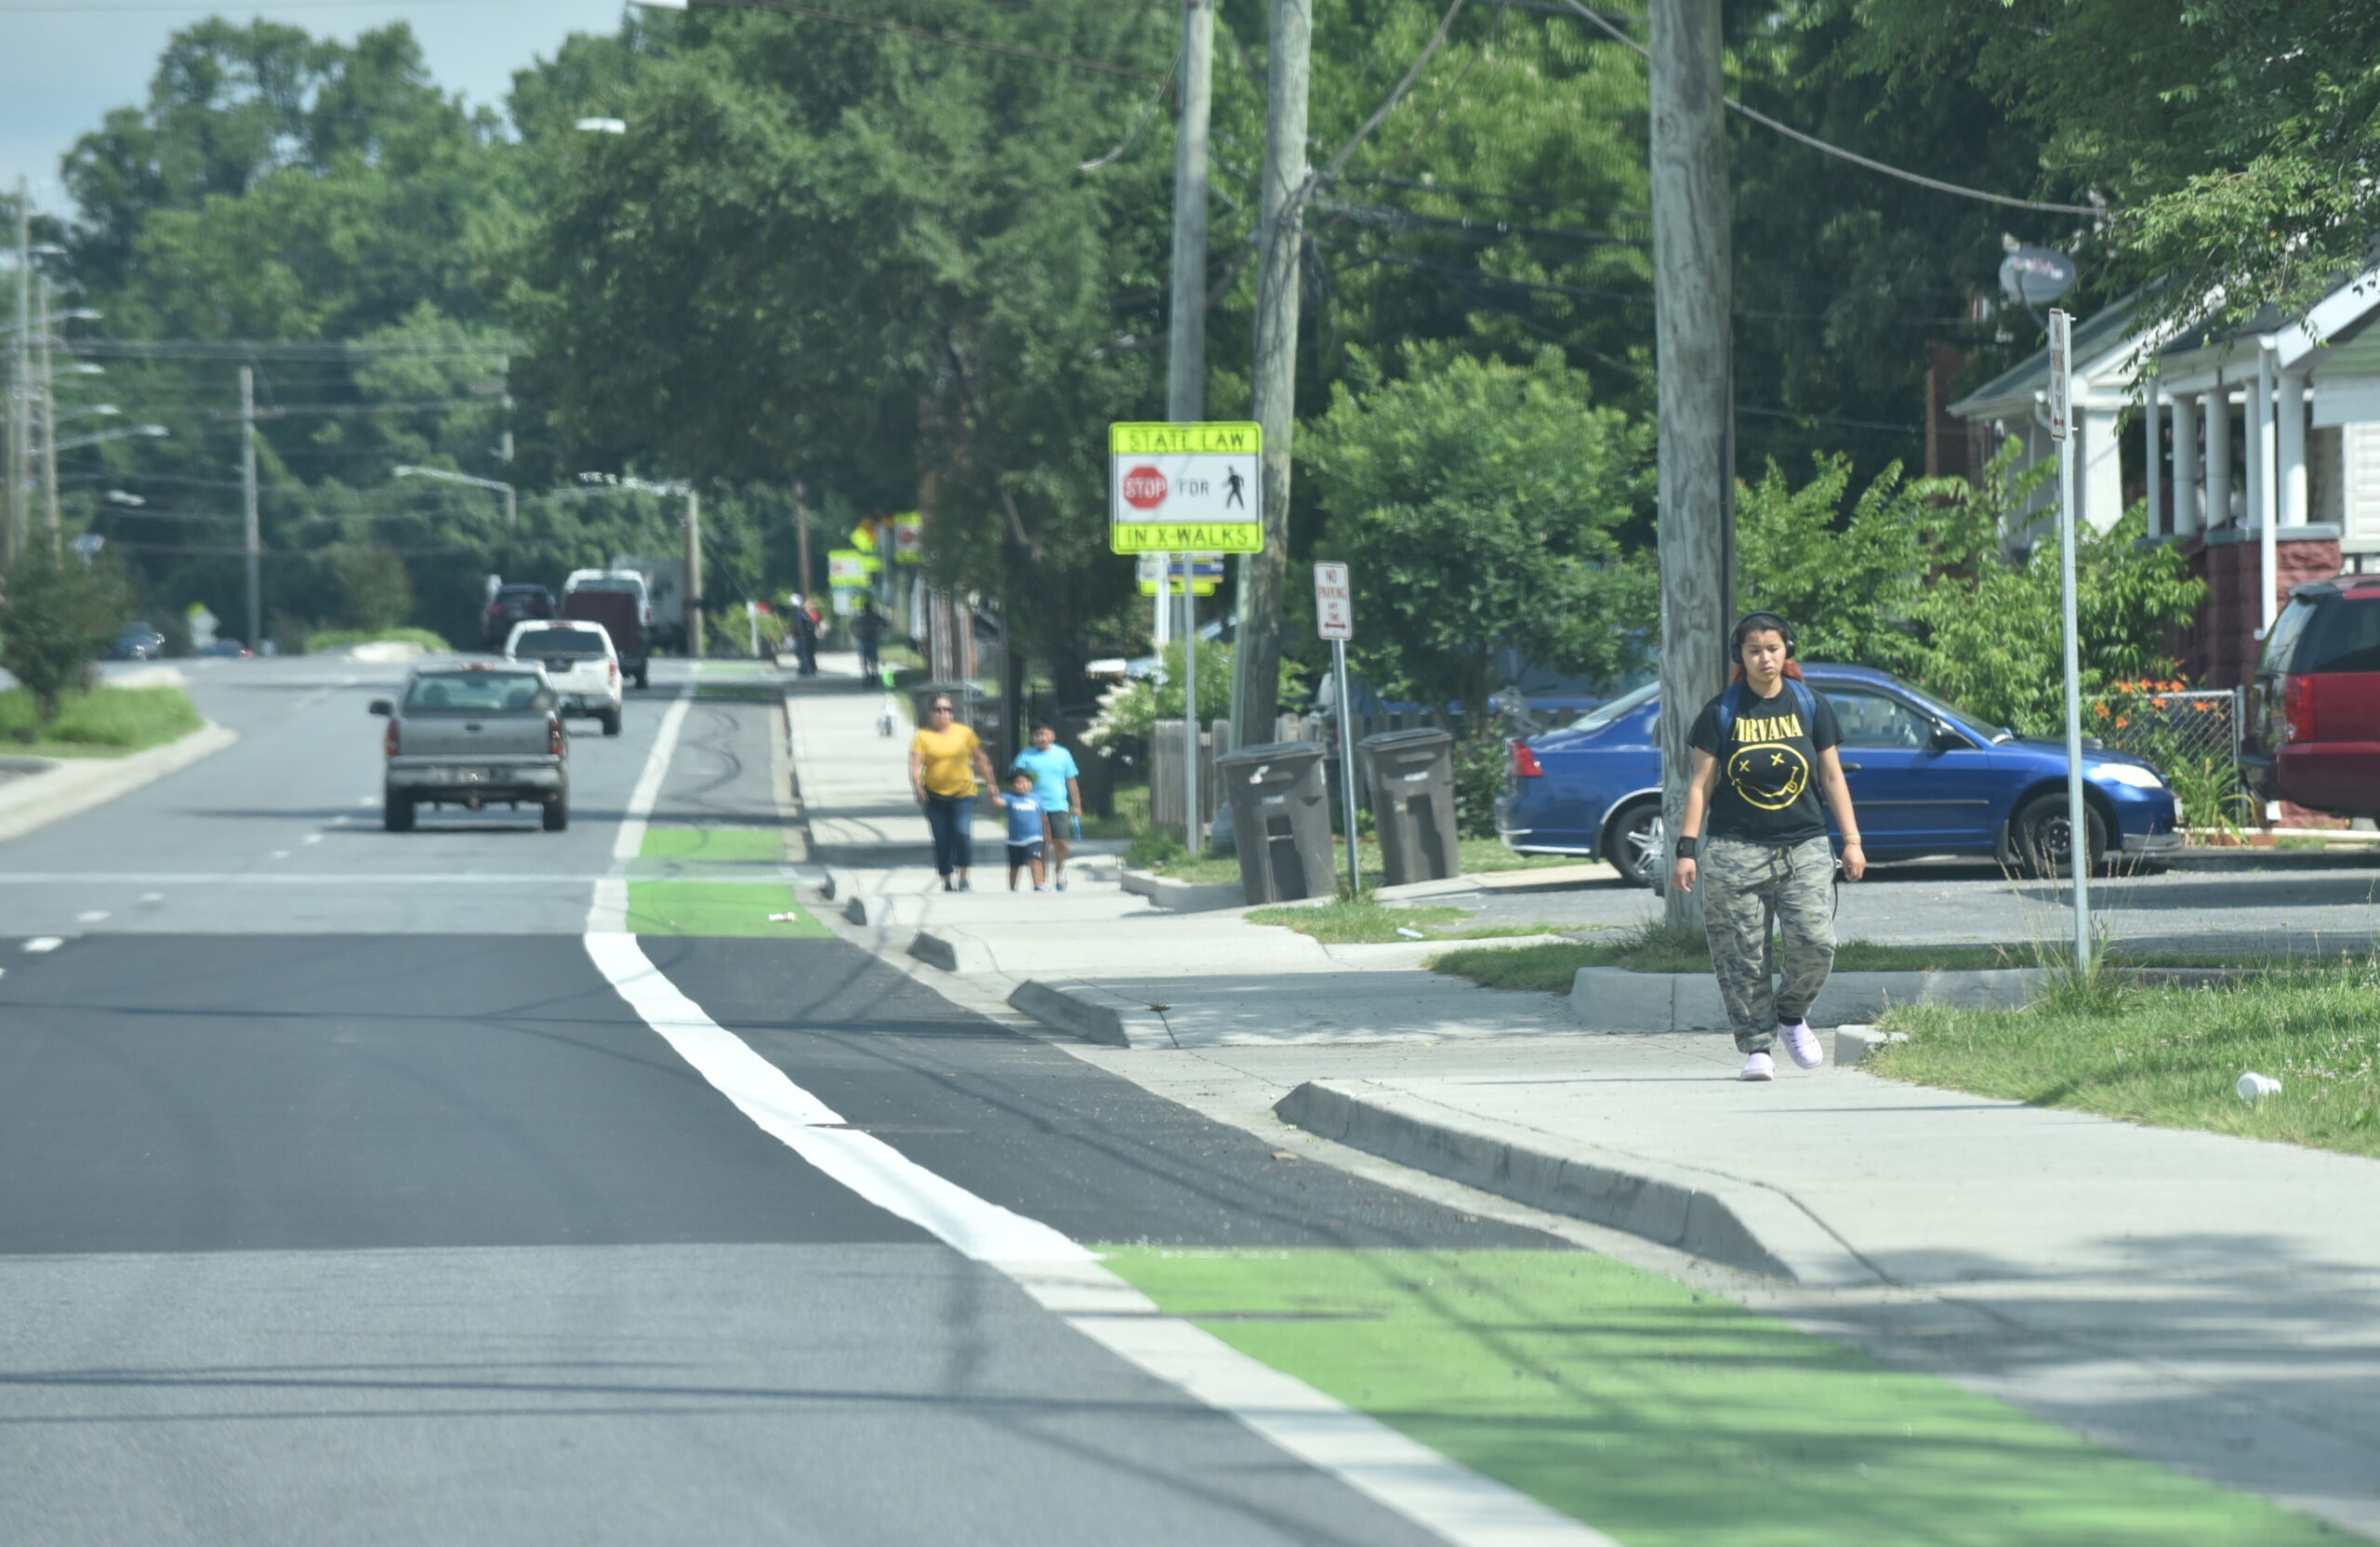 “Complete Streets” are being co-opted to build unsafe streets. Who is at fault?